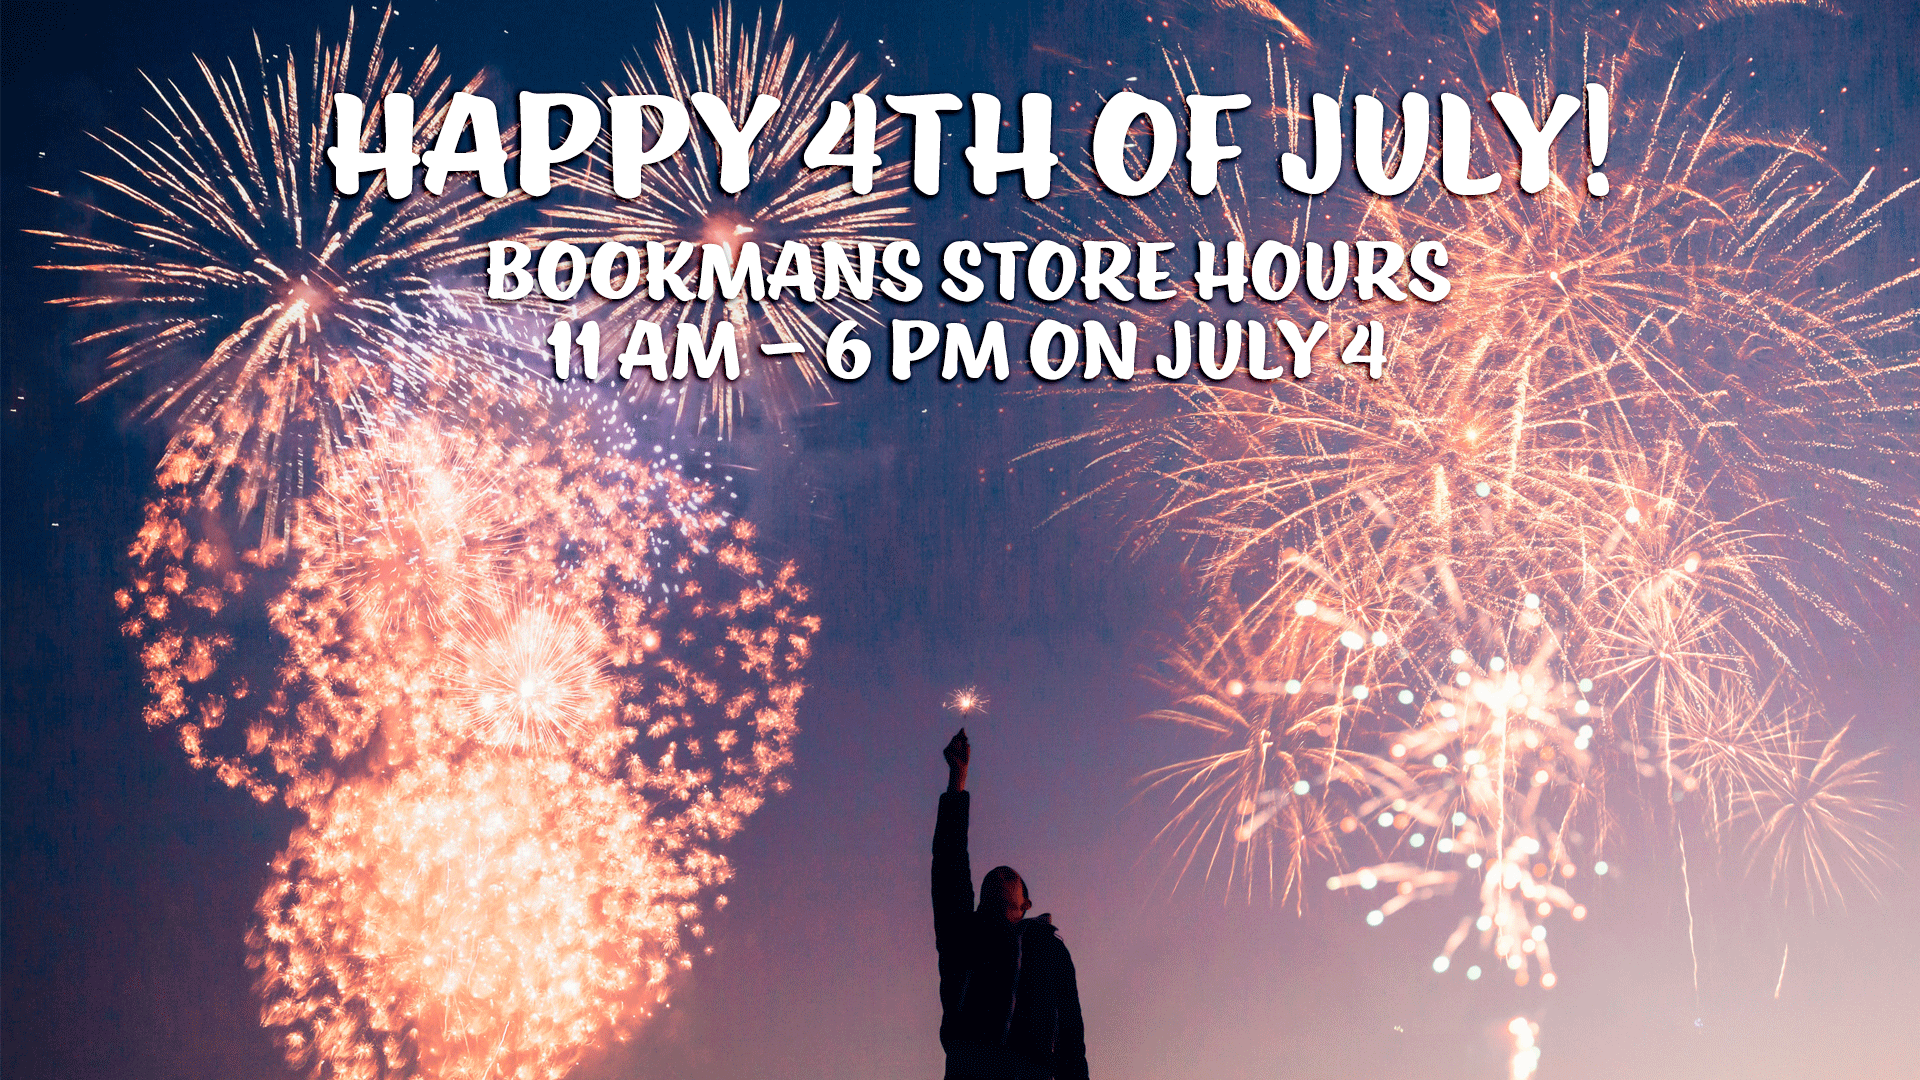 4th of july hours bookmans stores 11 am to 6 pm